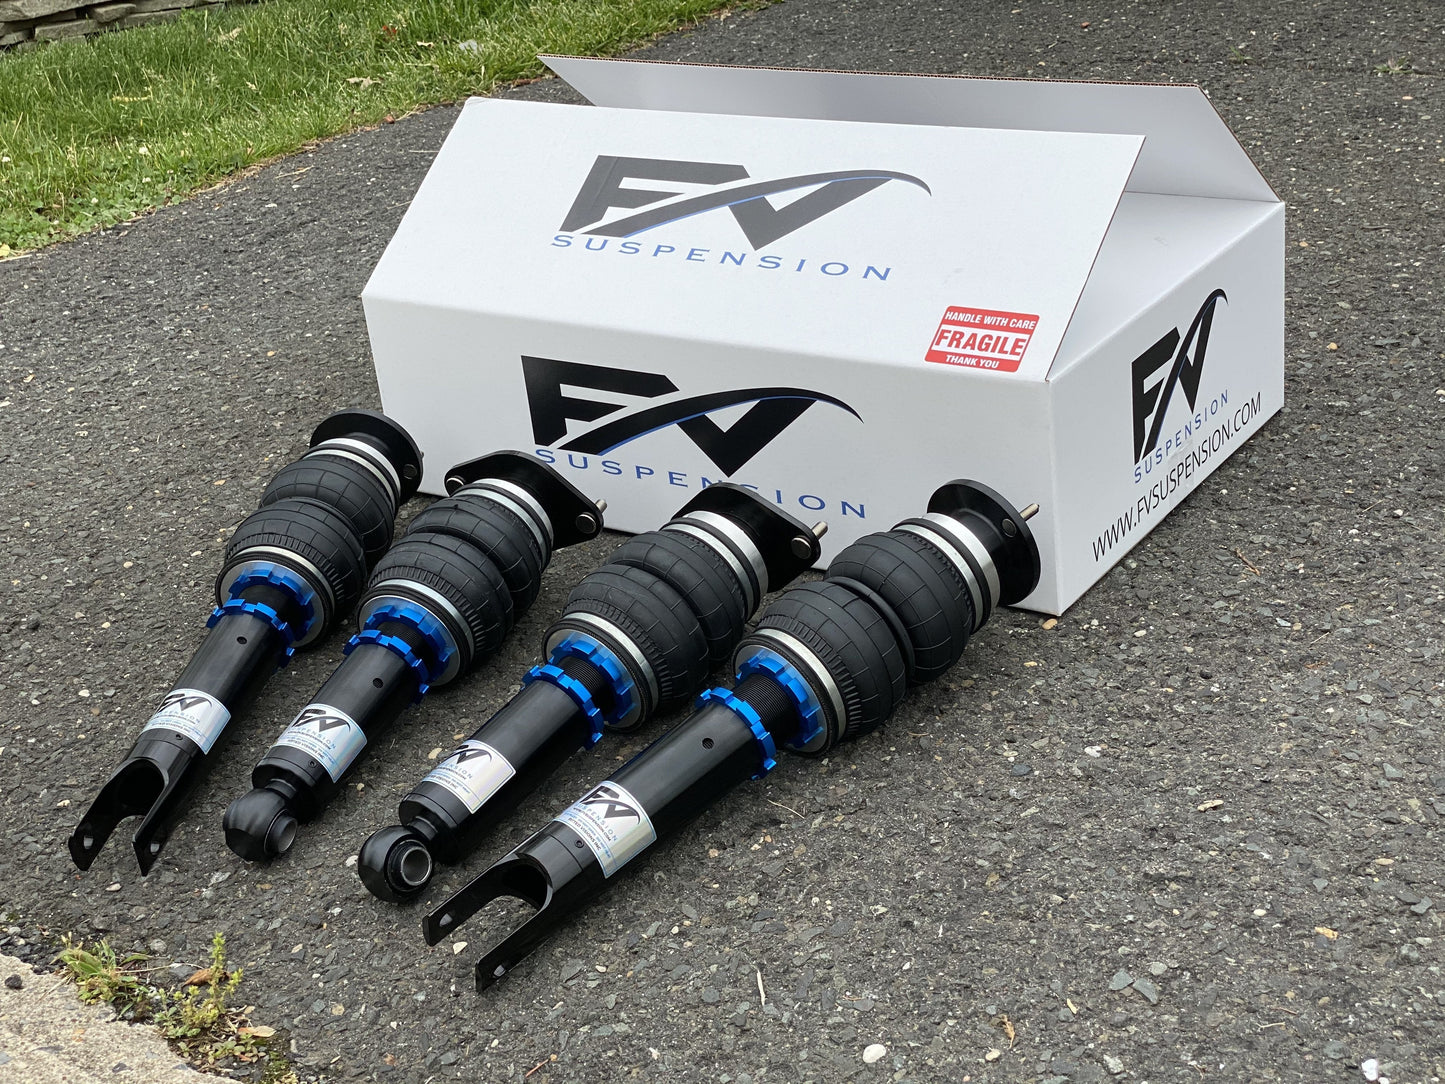 FV Suspension 3H Tier 3 Complete Air Ride kit for 2022+ Mercedes-Benz C-Class W206 AWD - Full Kit